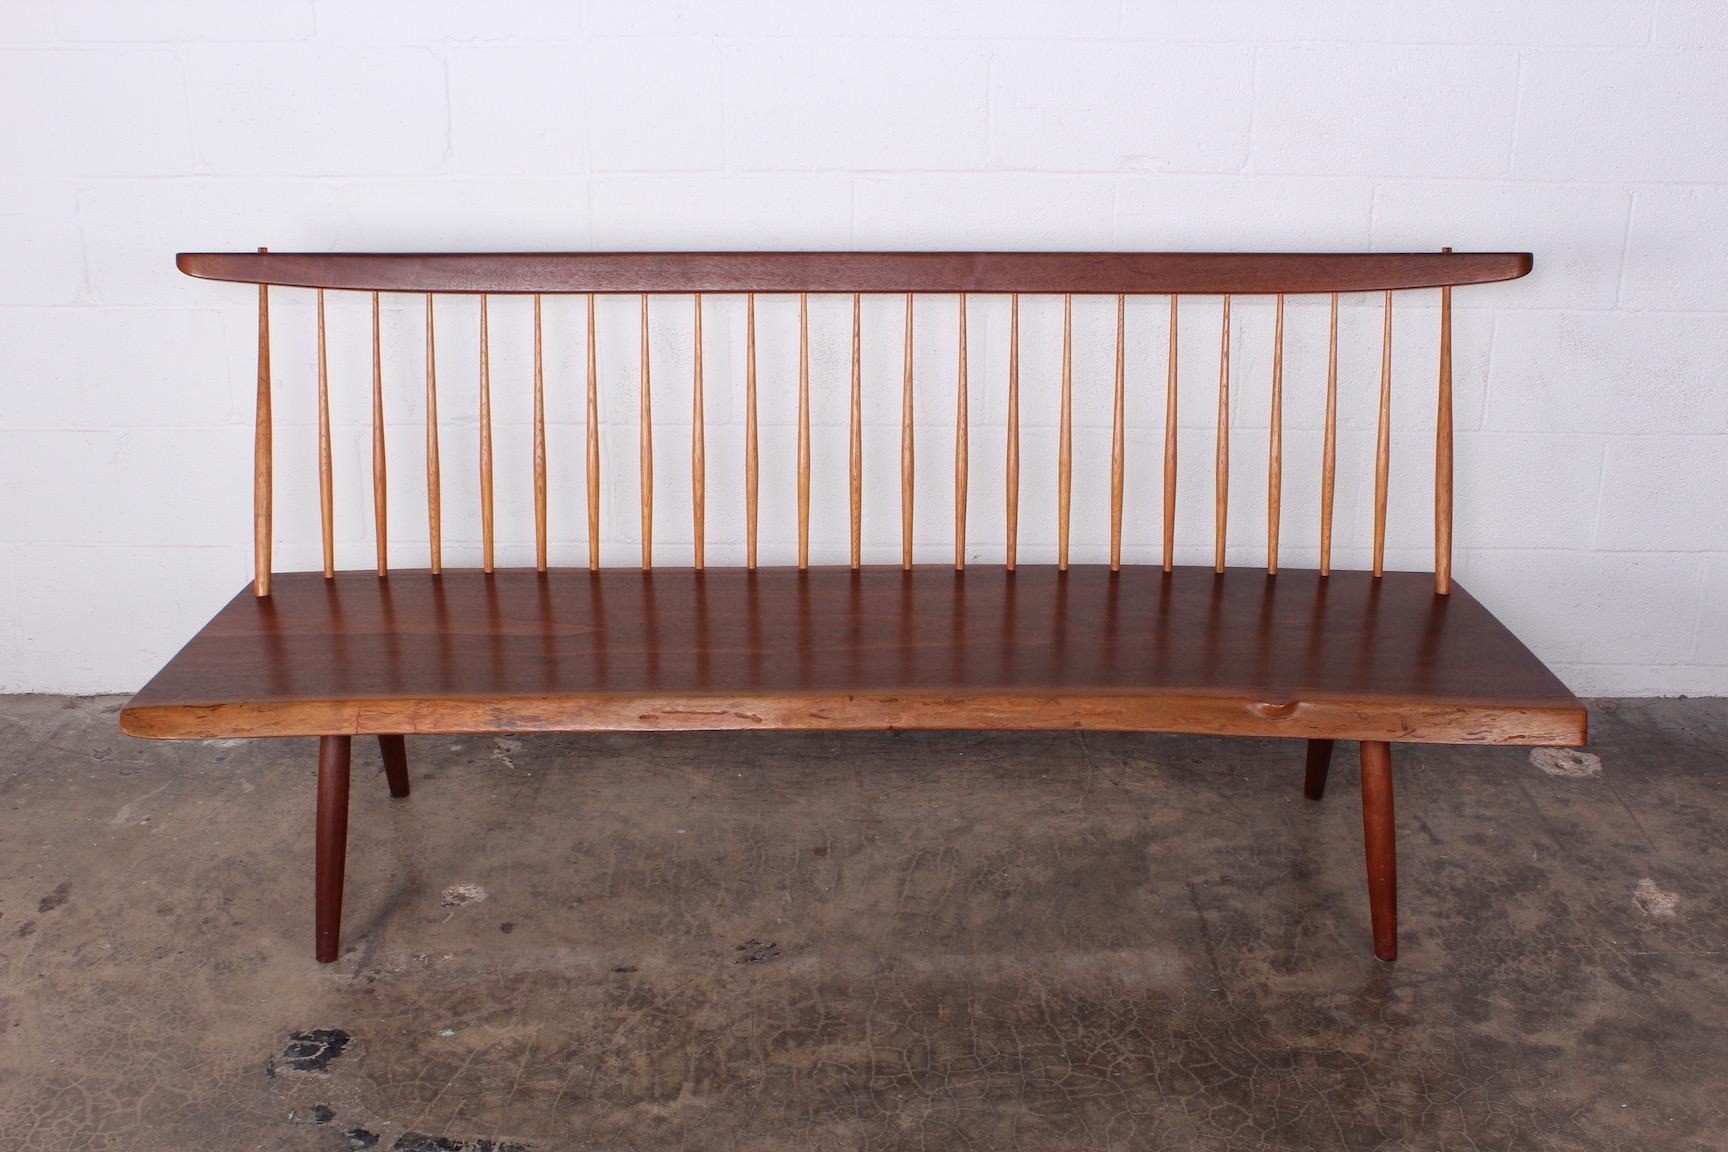 A walnut bench by George Nakashima signed and dated 1976. Sold with full documentation.